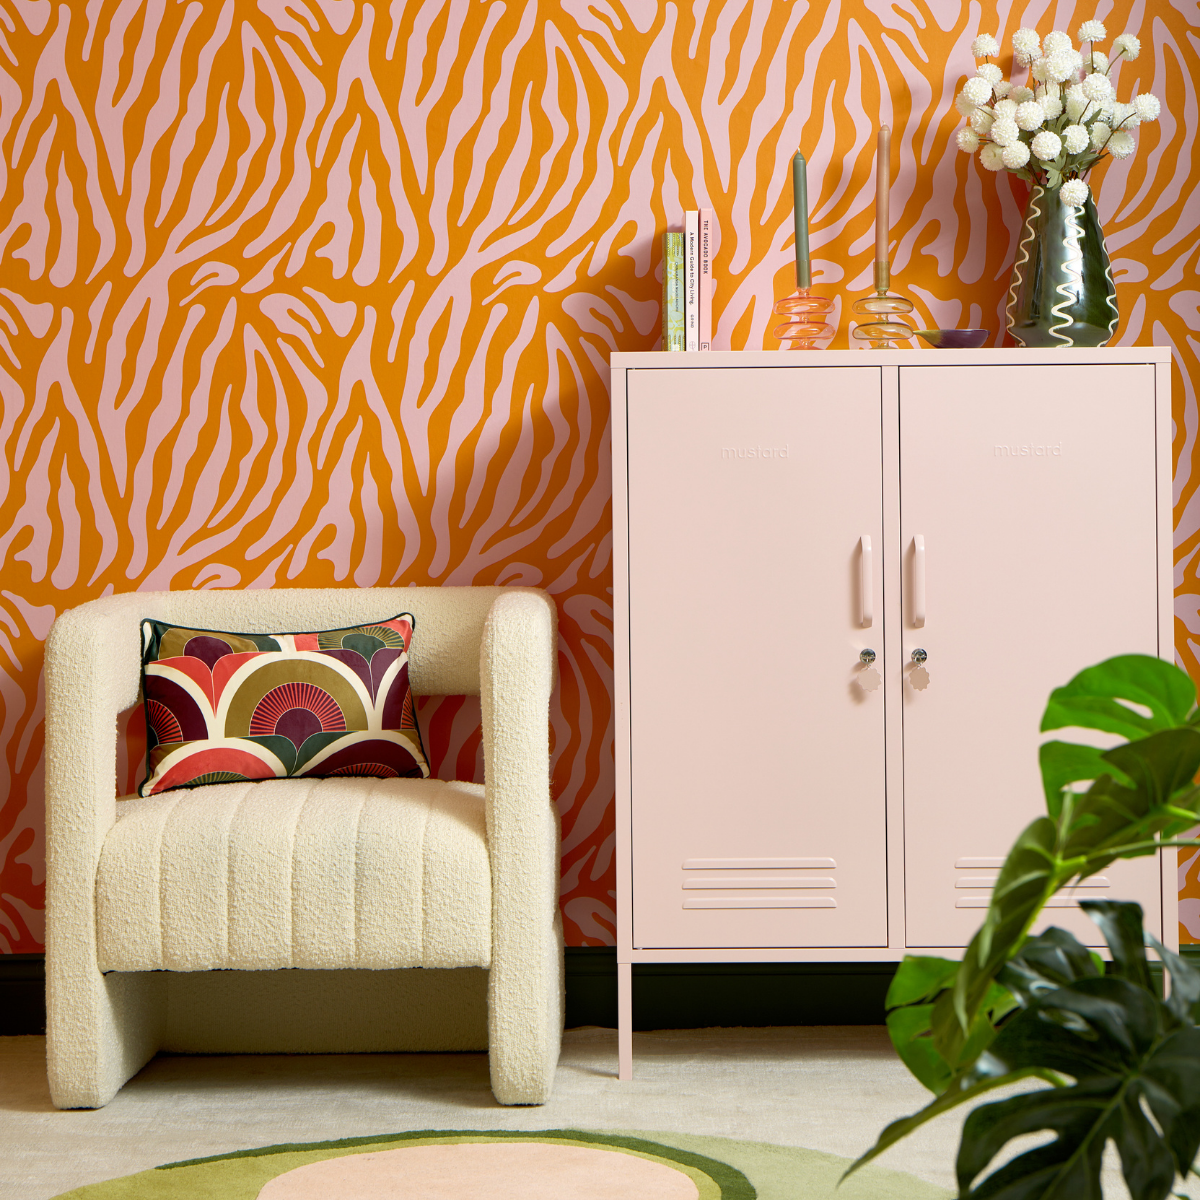 A Blush Midi sits against pink and orange zebra patterned wallpaper. There is a cream boucle chair next to the locker.